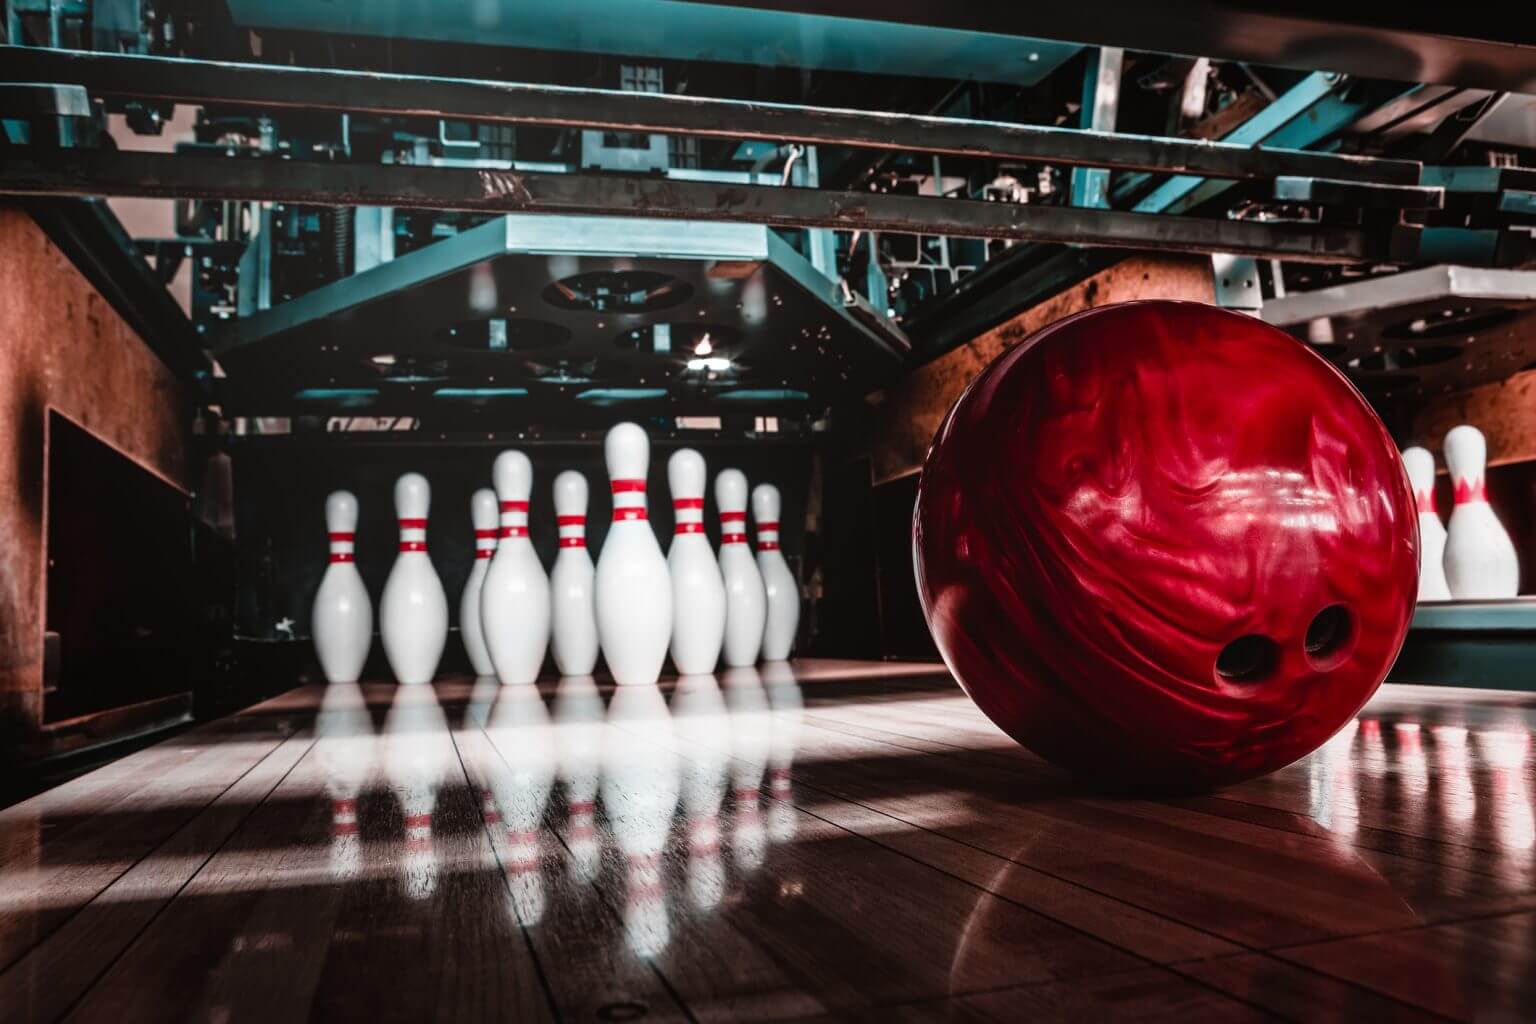 Williamsburg bowling alley opens new location on the Lower East Side